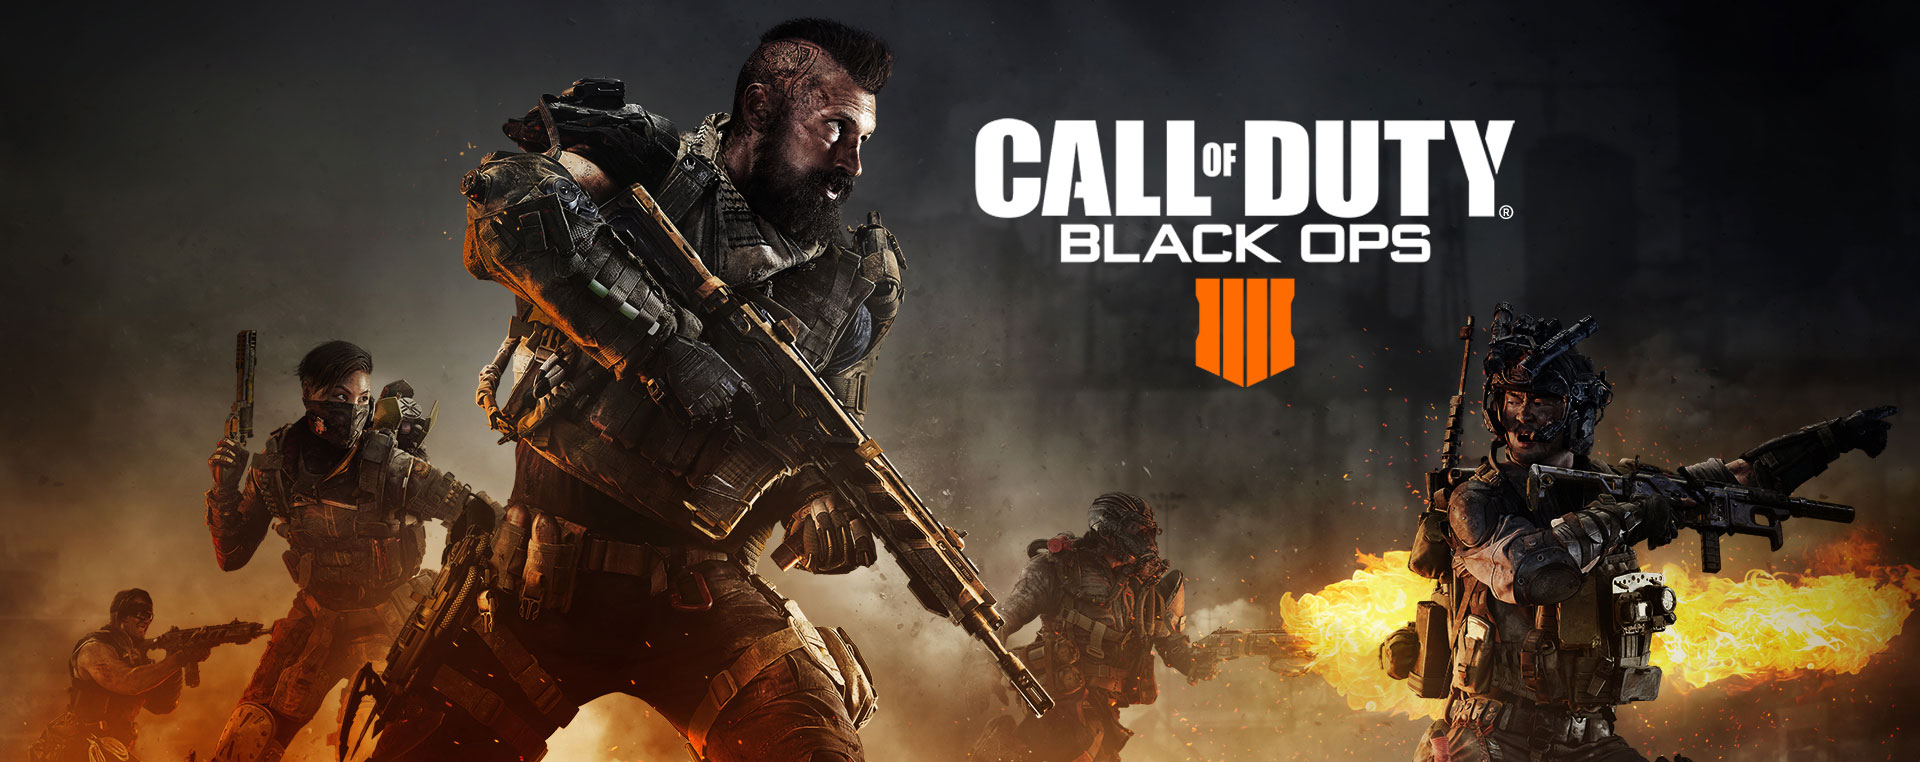 Call of duty black ops 5